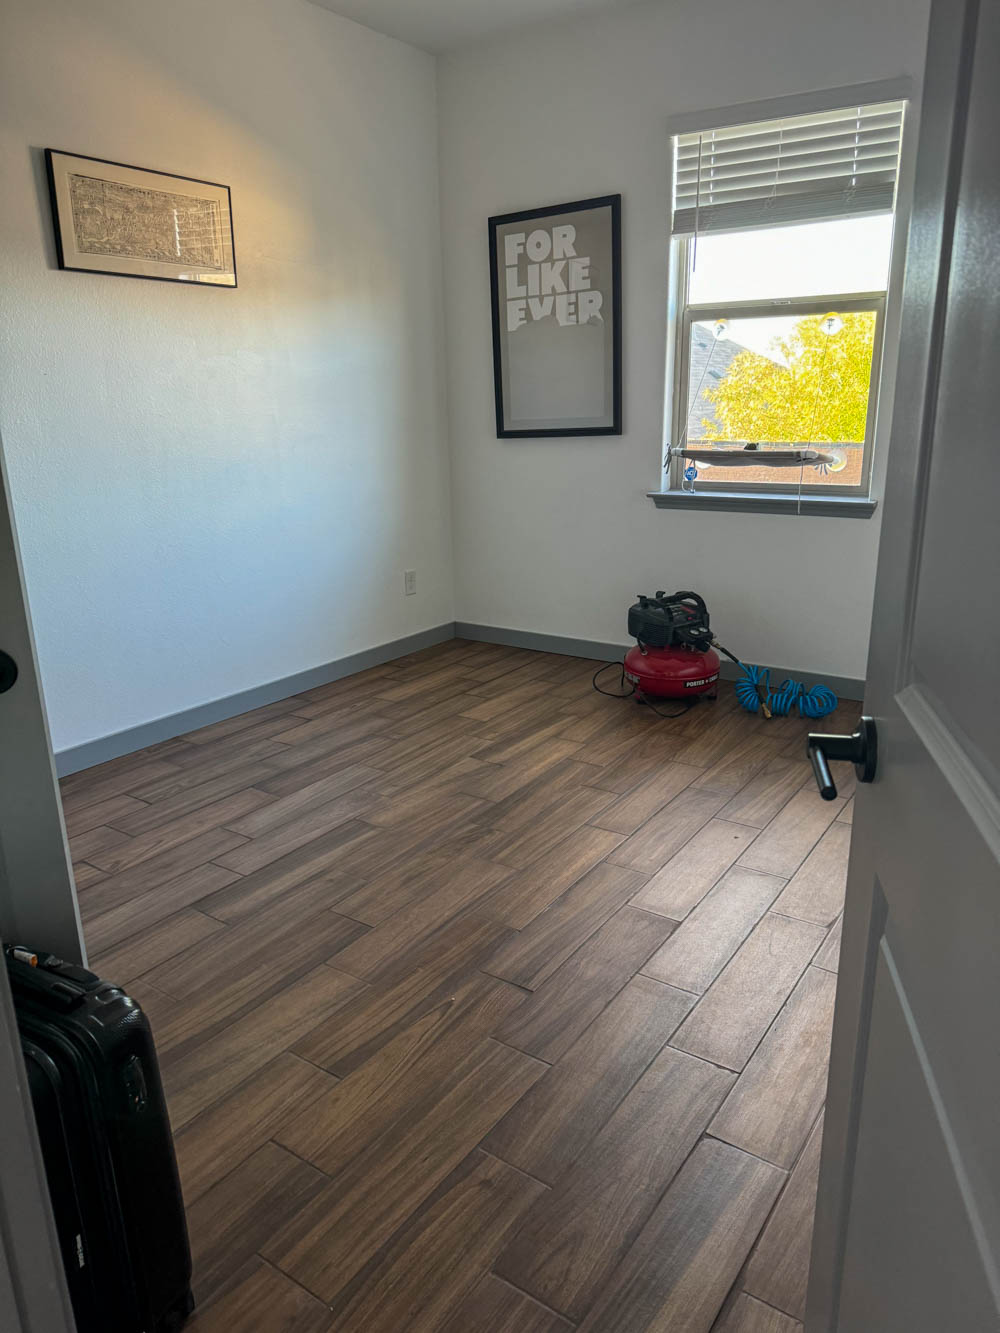 Why We Chose Wood-Like Tile For Our Floors